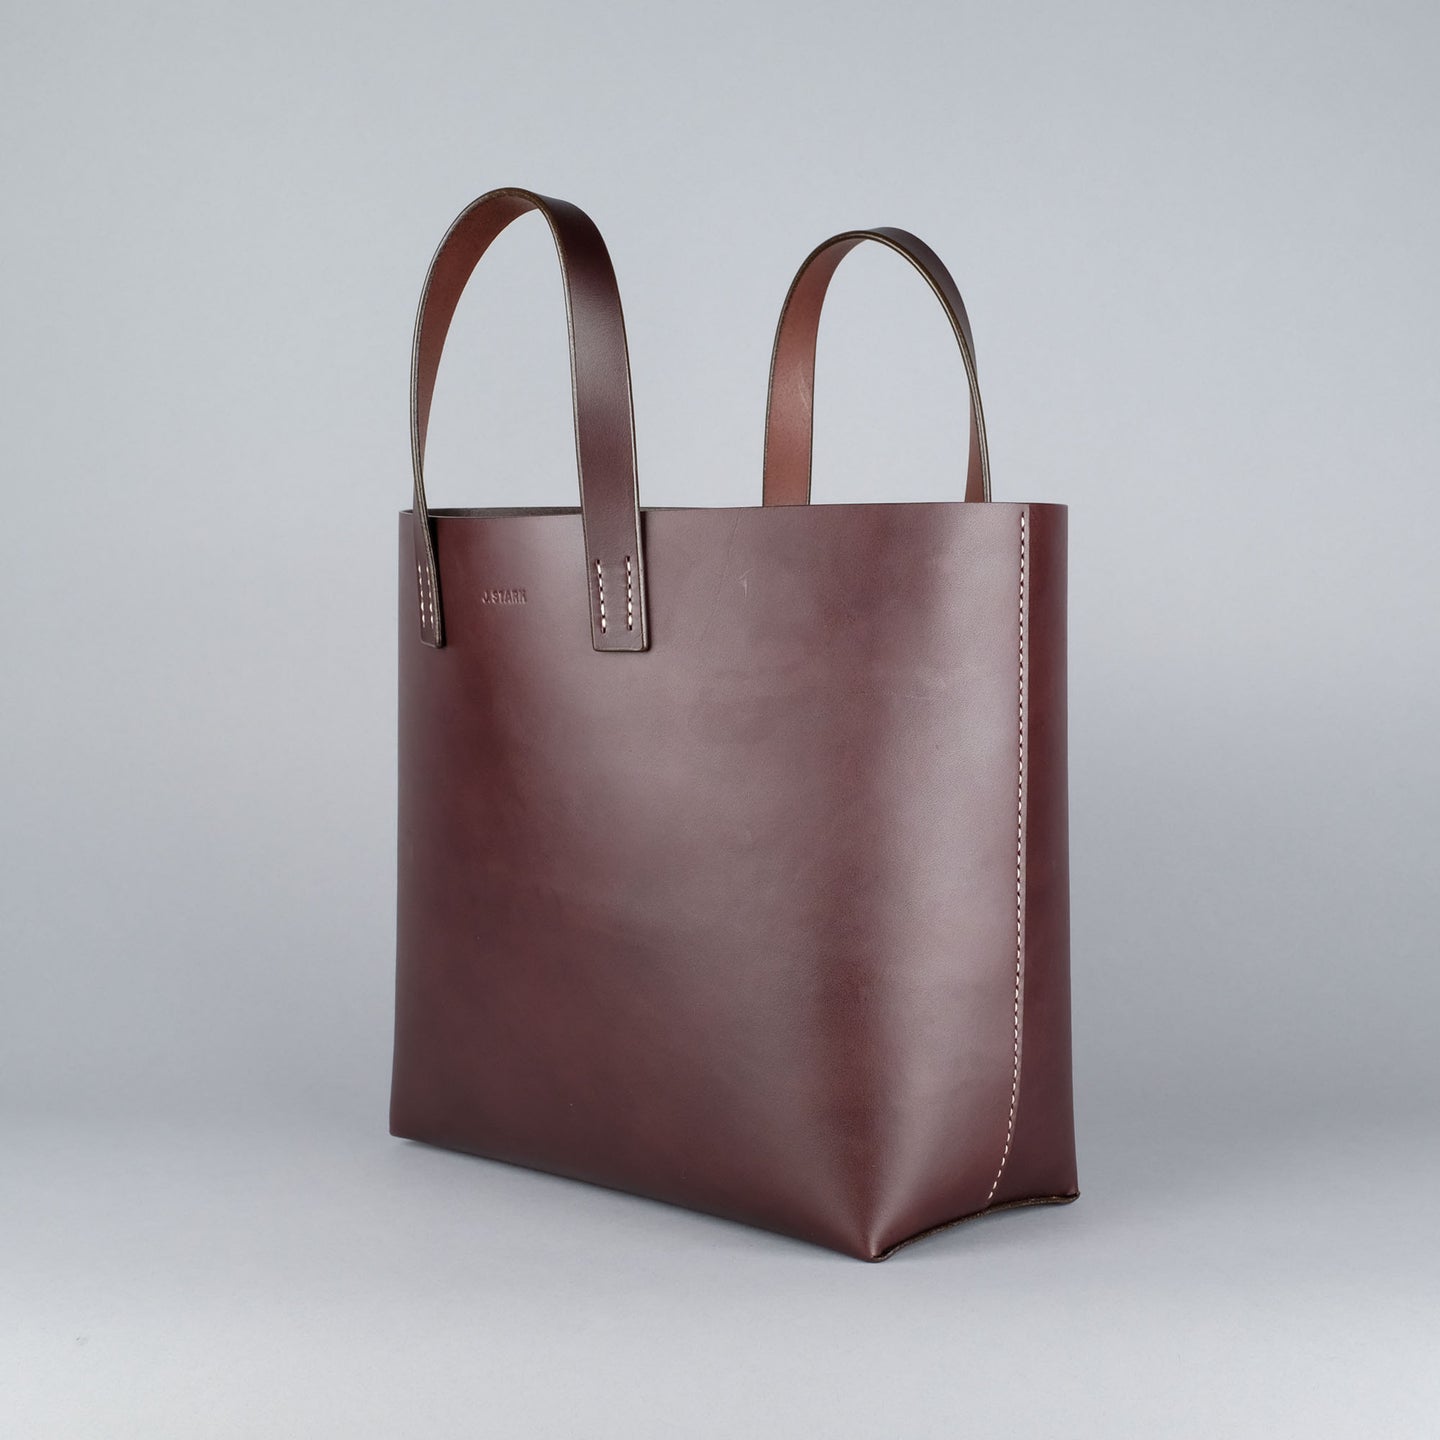 Deep Brown Women's Leather Tote Bag